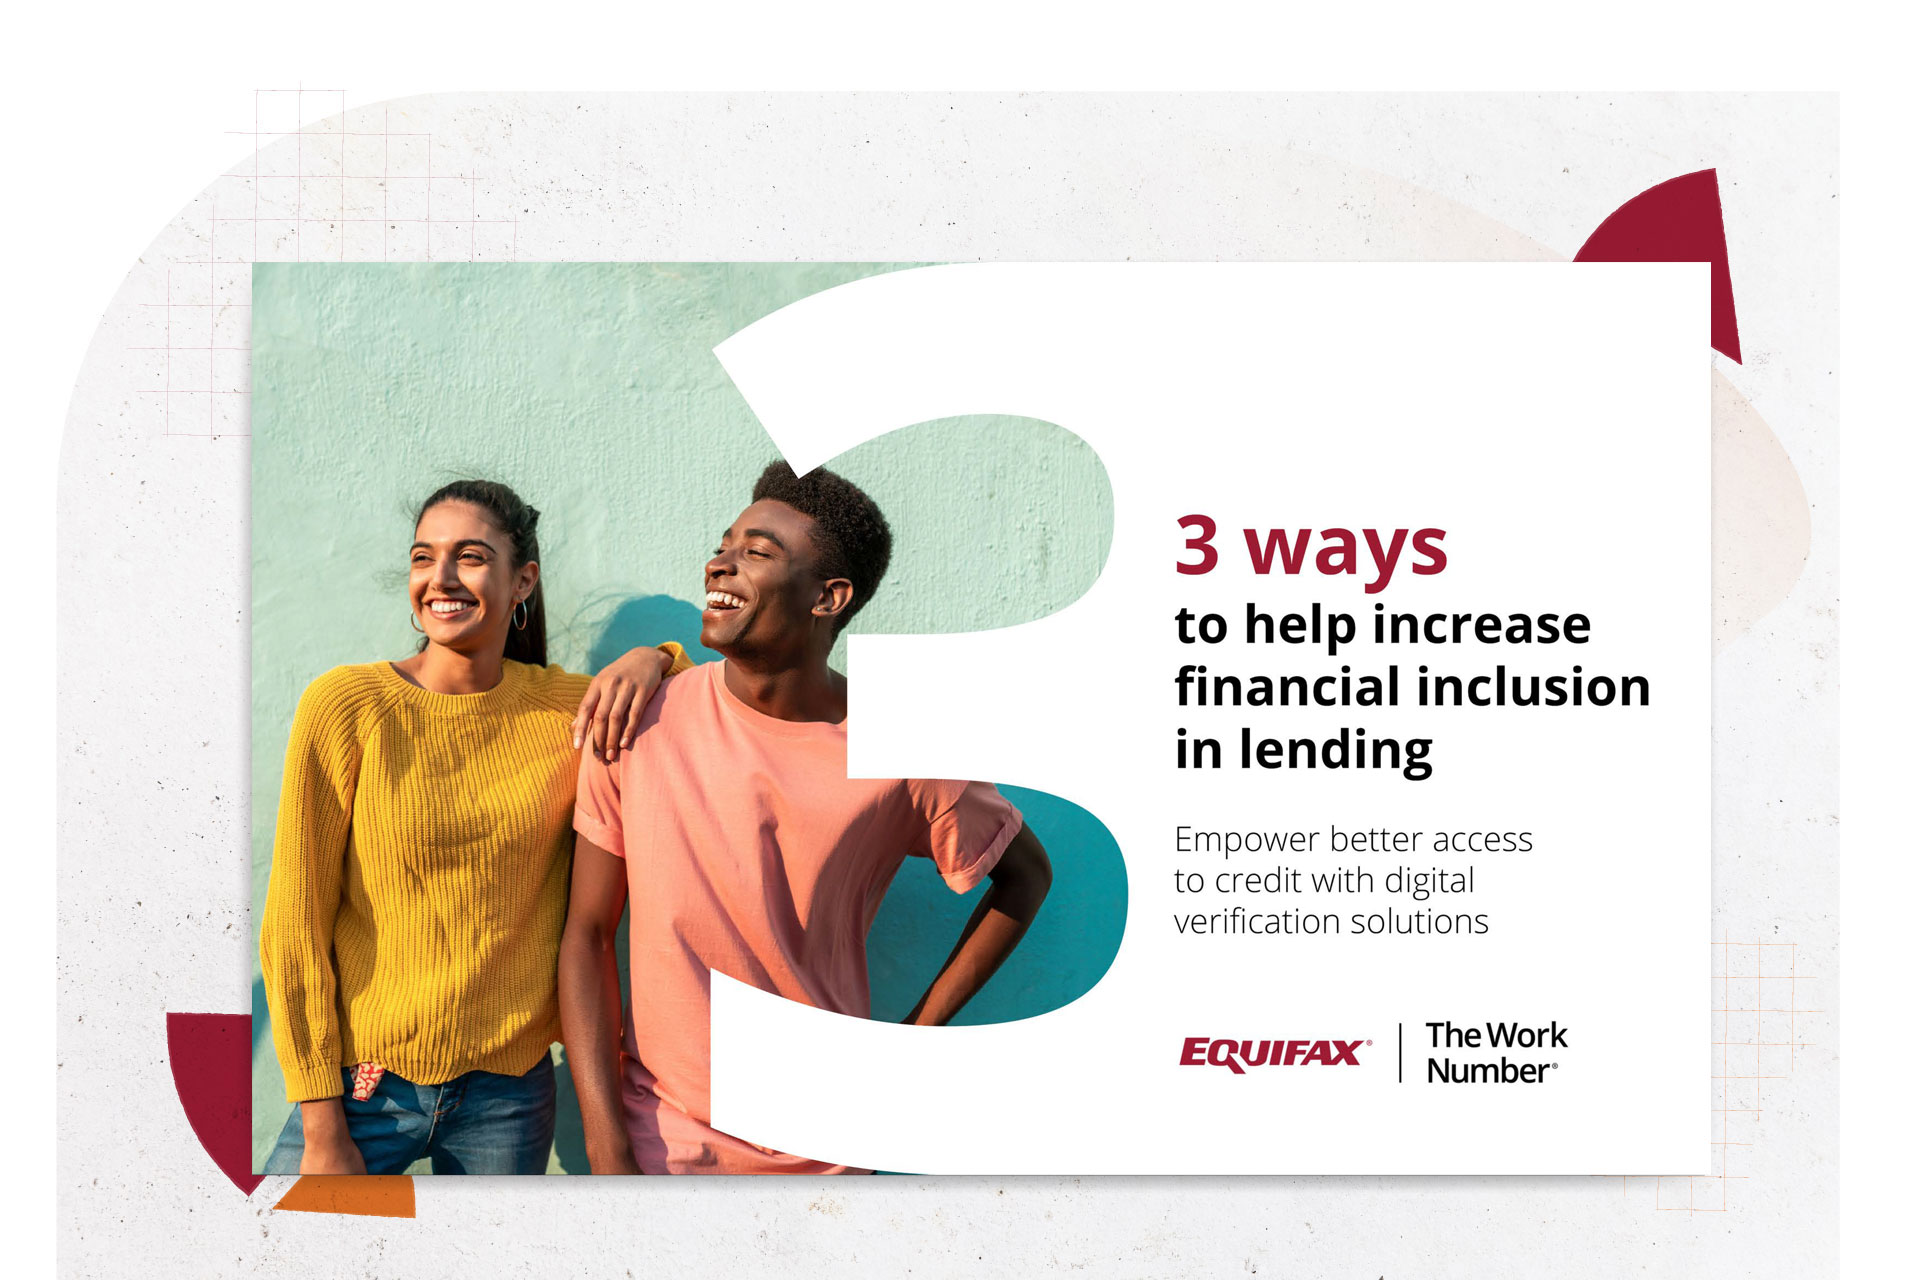 A snapshot - 3 ways to help increase financial inclusion in lending resource - In the background there are graph lines and various shapes